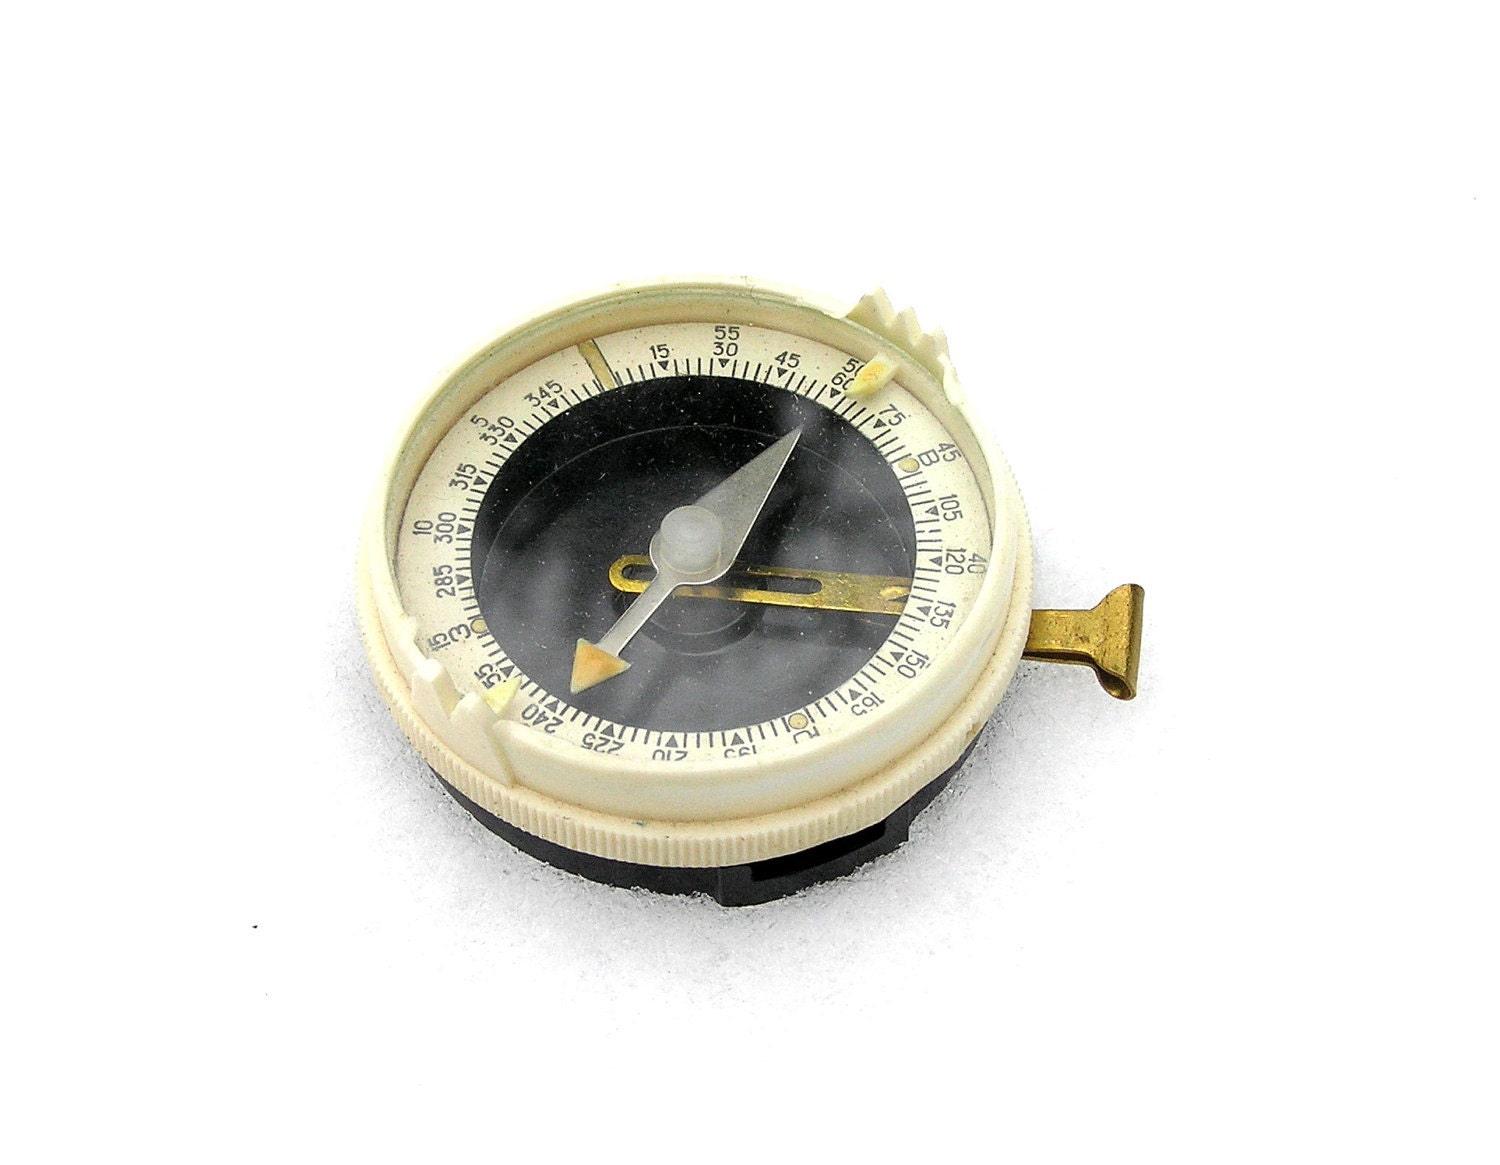 Vintage compass collectibles black and white 1970s - SoYesterdaySoCool